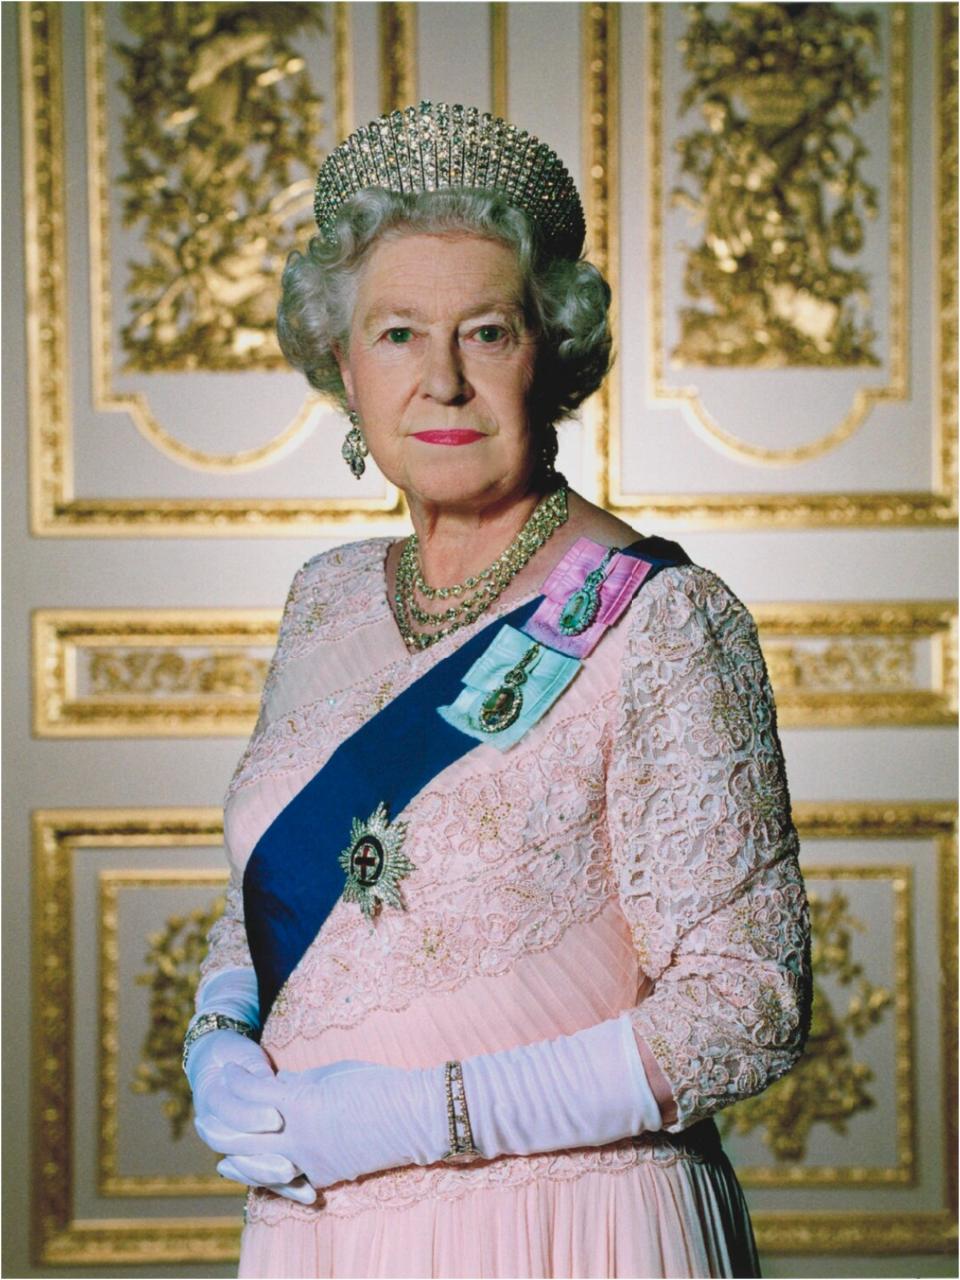 The Queen posing in a light pink lace and chiffon dress with a blue sash and medals along with gold jewelry, a large crown, and white gloves.